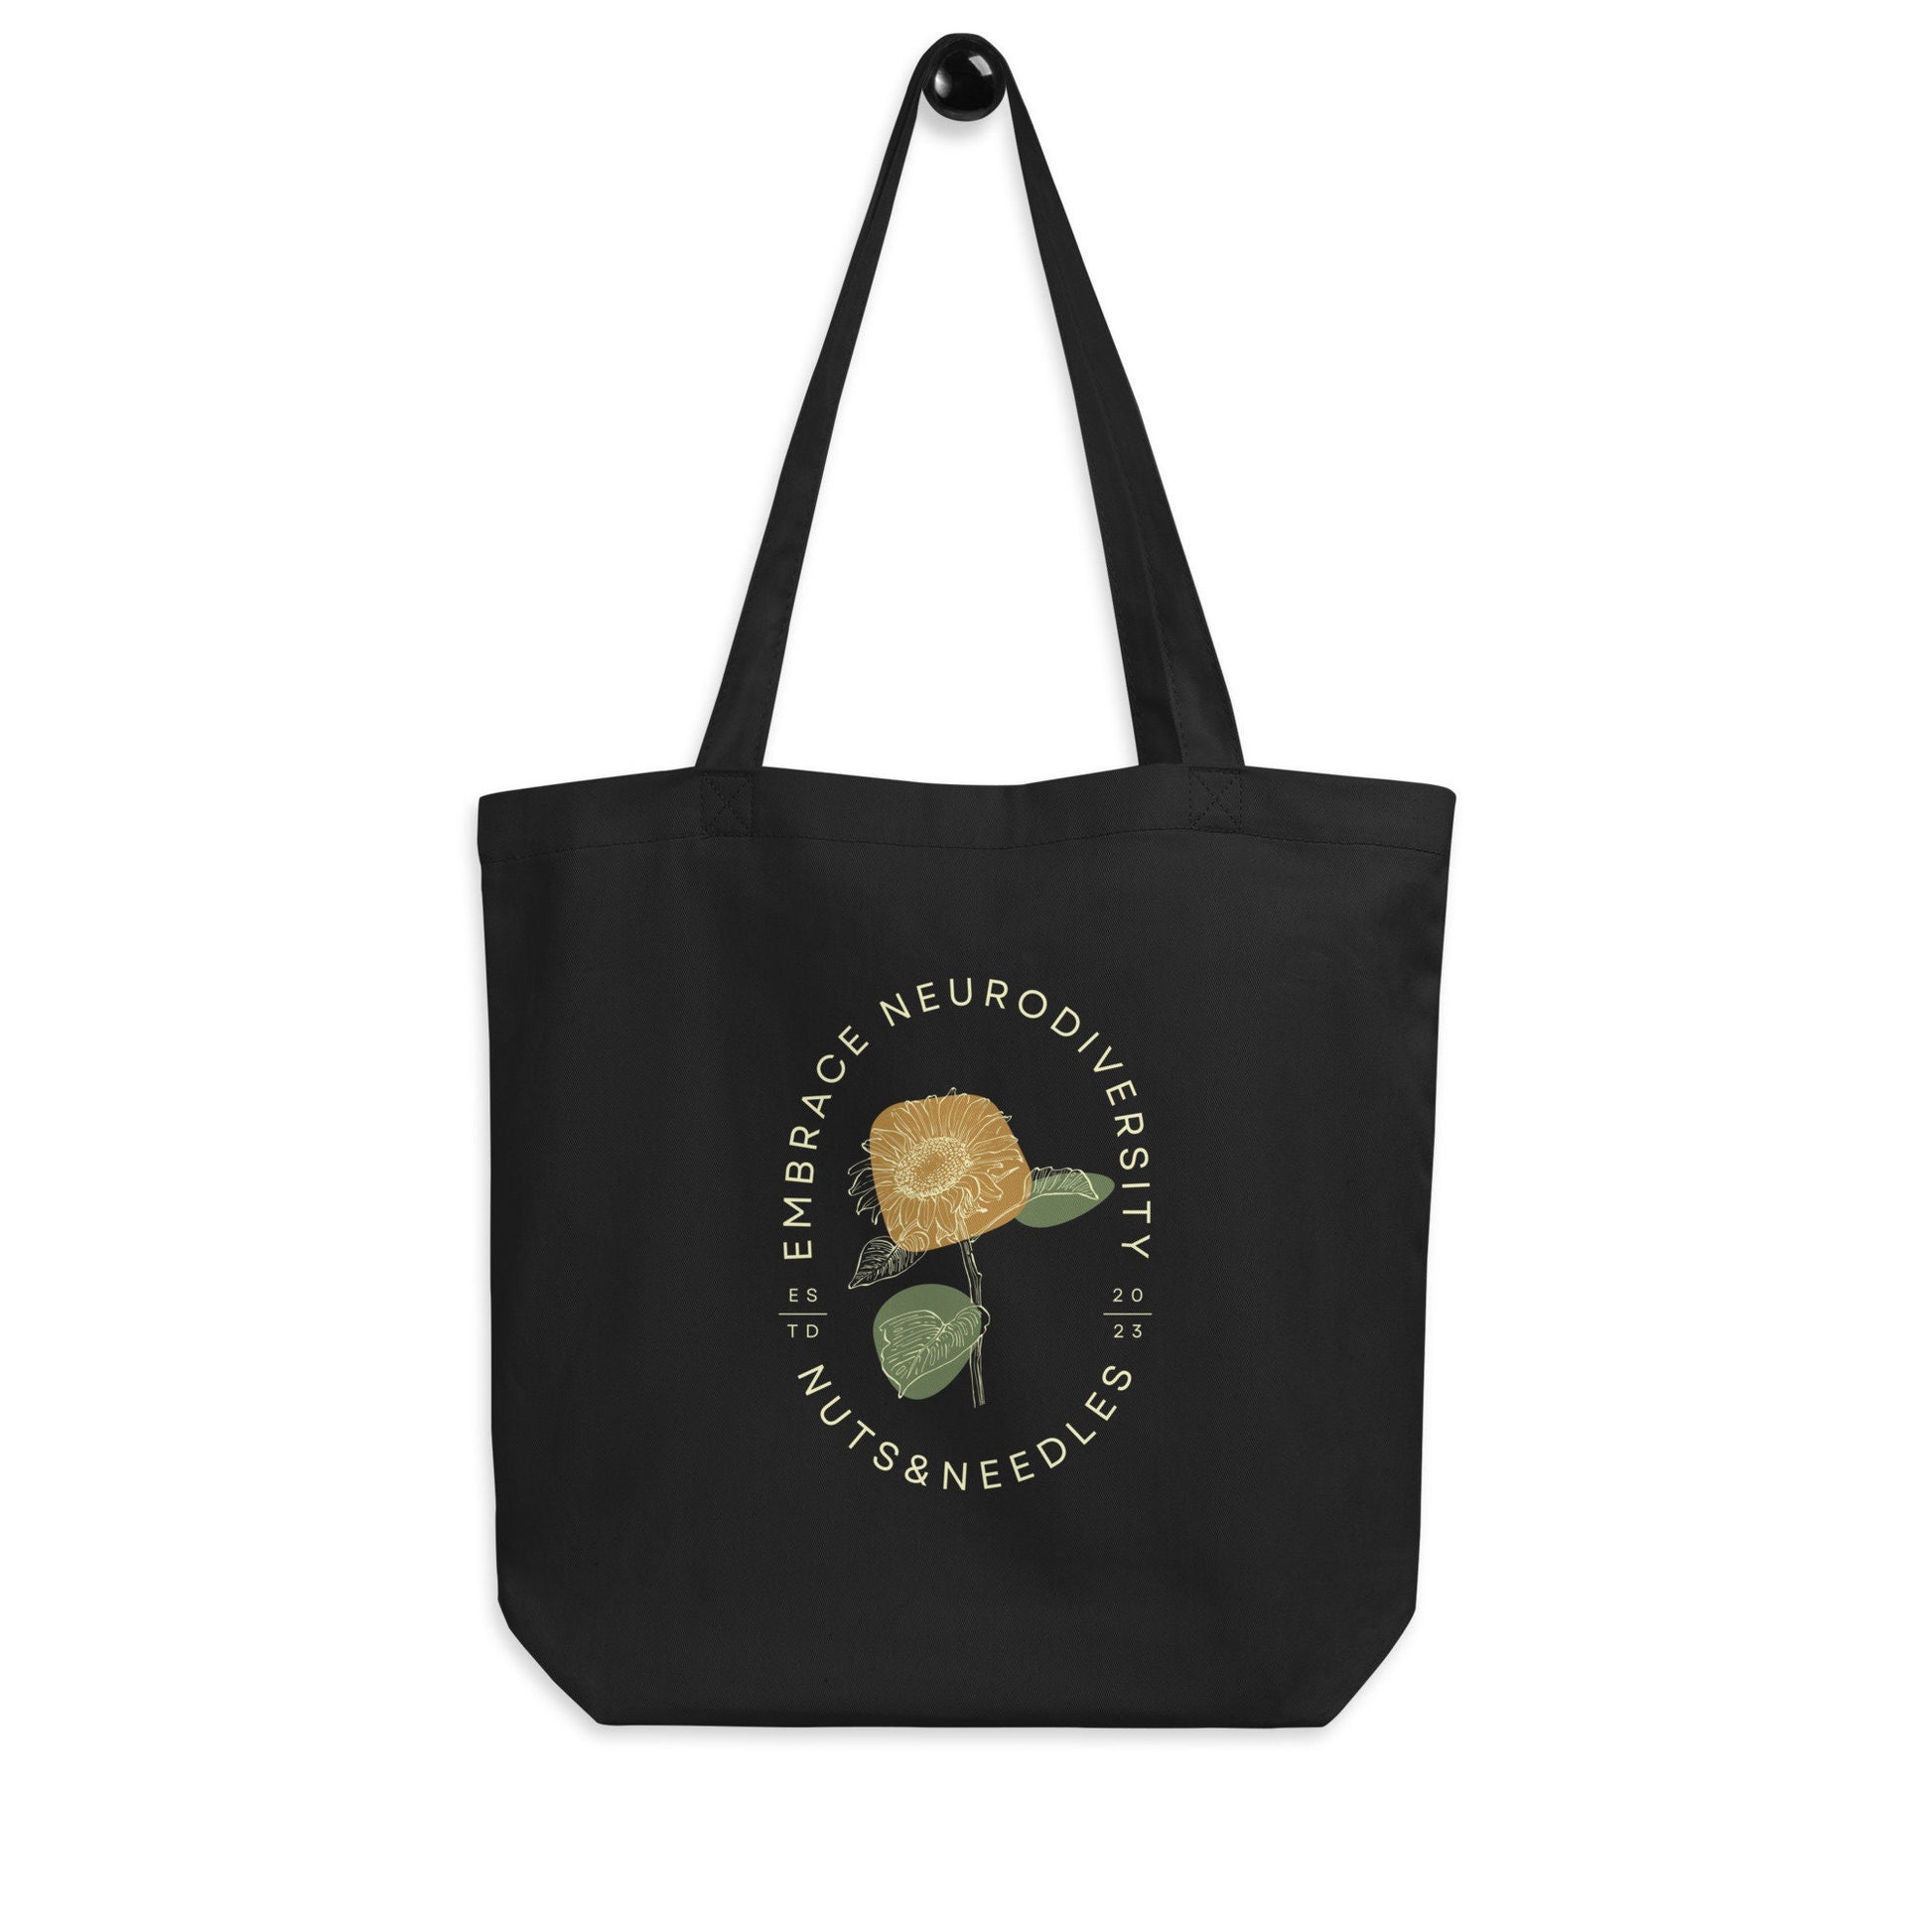 Mental Health Tote Bag &#39;Embrace Neurodiversity&#39;, part of profit donated to Mental Health Charity, Autism, ADHD, Asperger, Neurodiversity